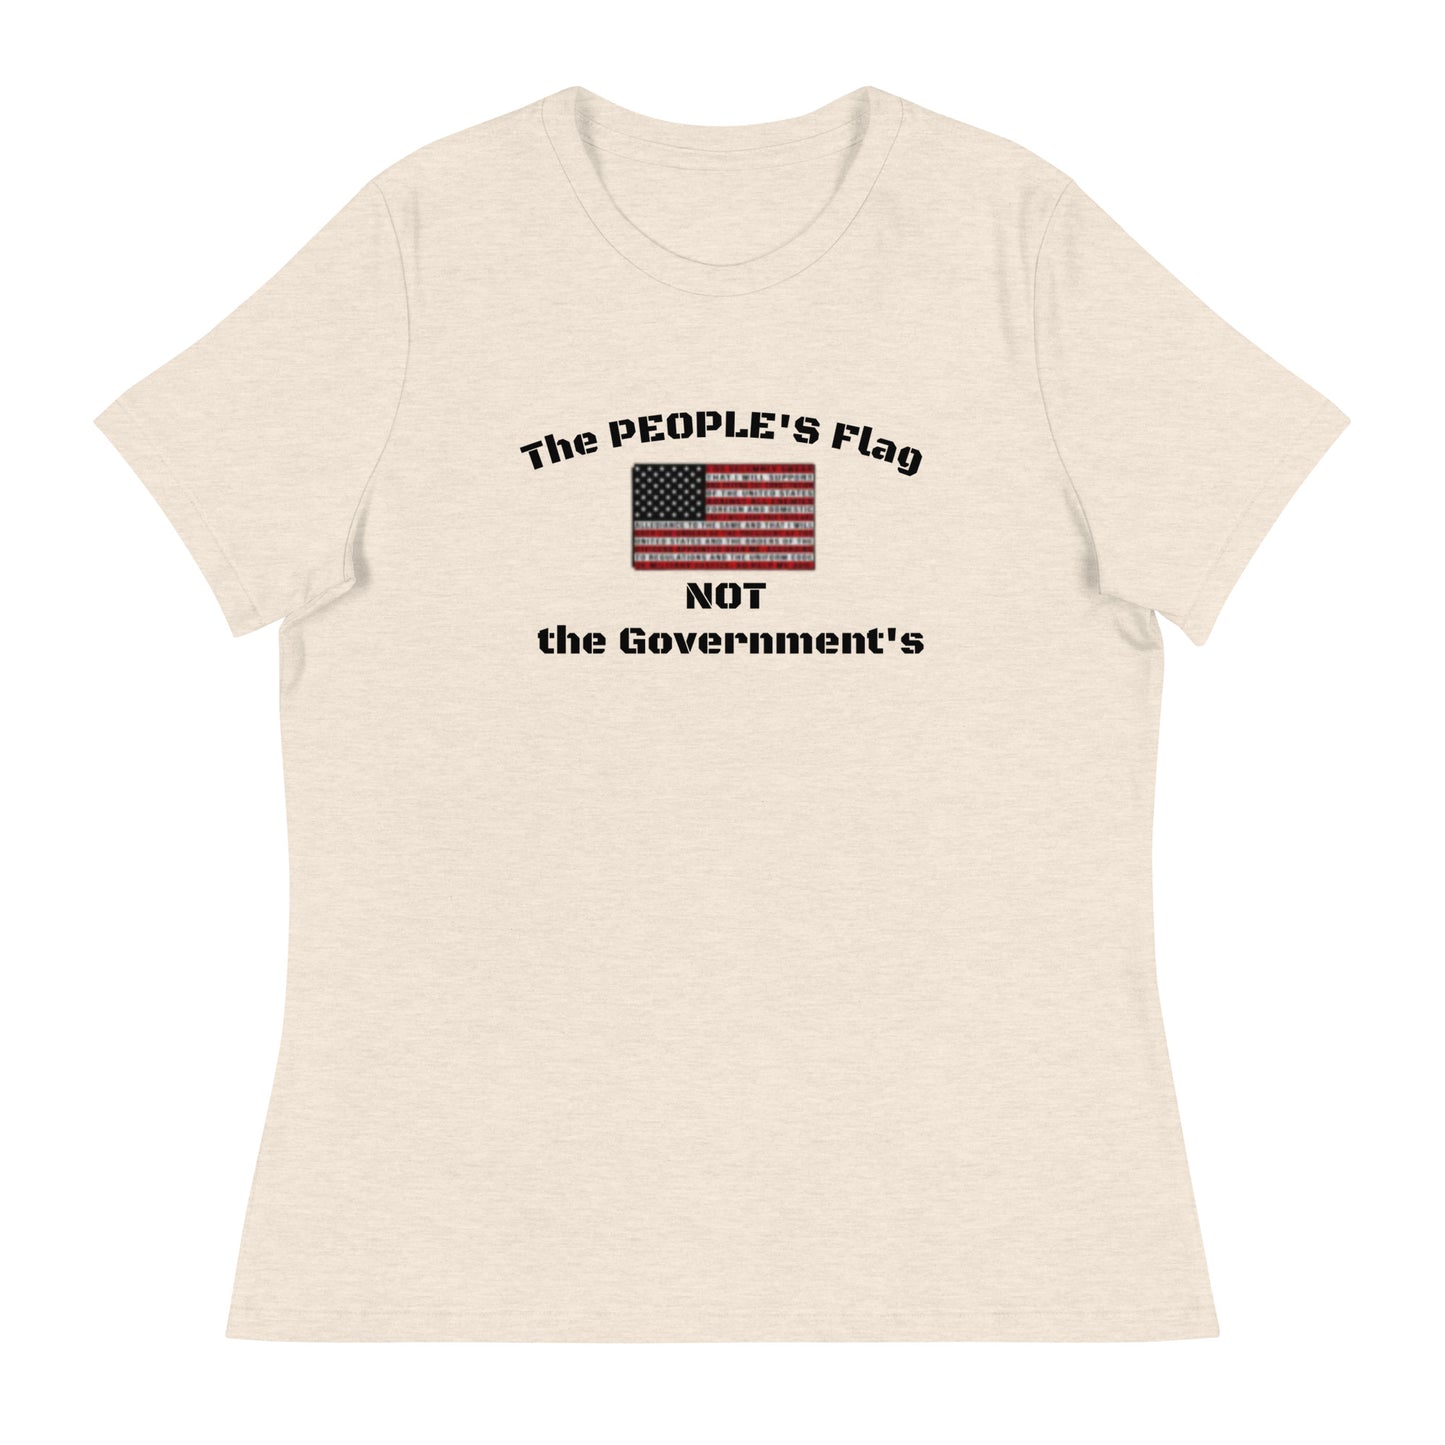 The PEOPLE'S Flag, NOT the Government's Women's Relaxed T-Shirt